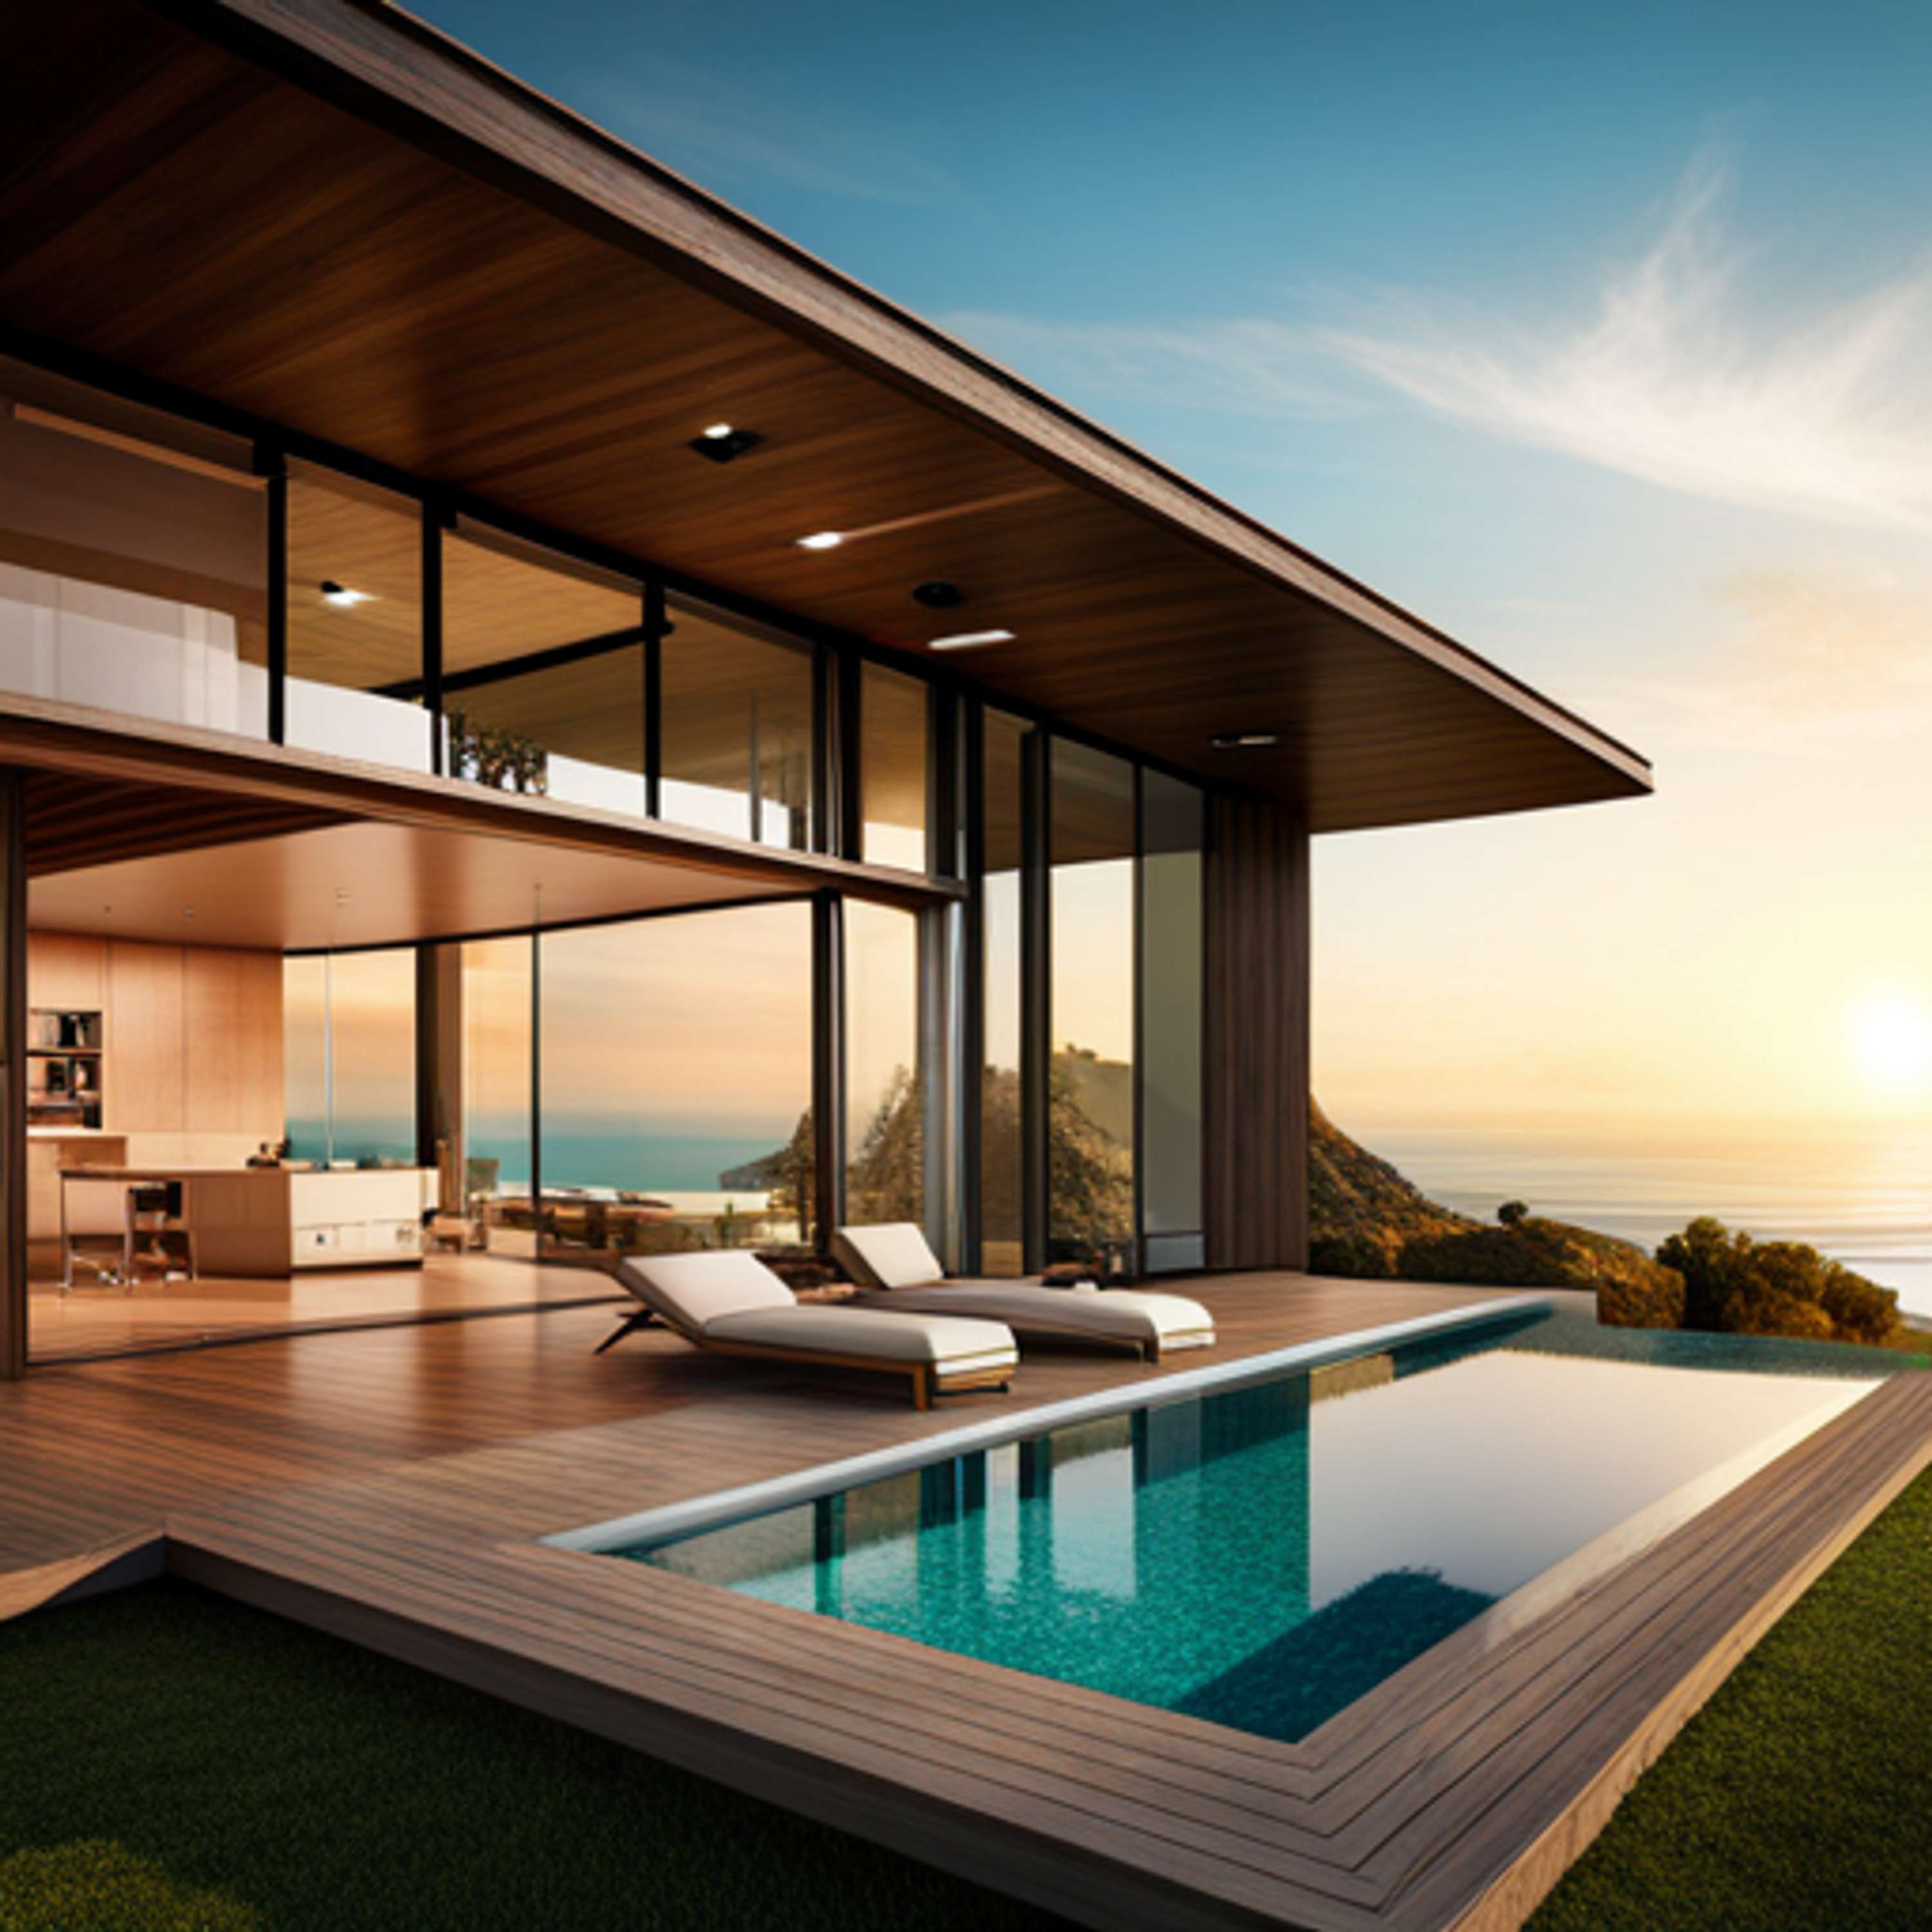 Luxury Living: Malibu Homes for Sale with Ocean Views